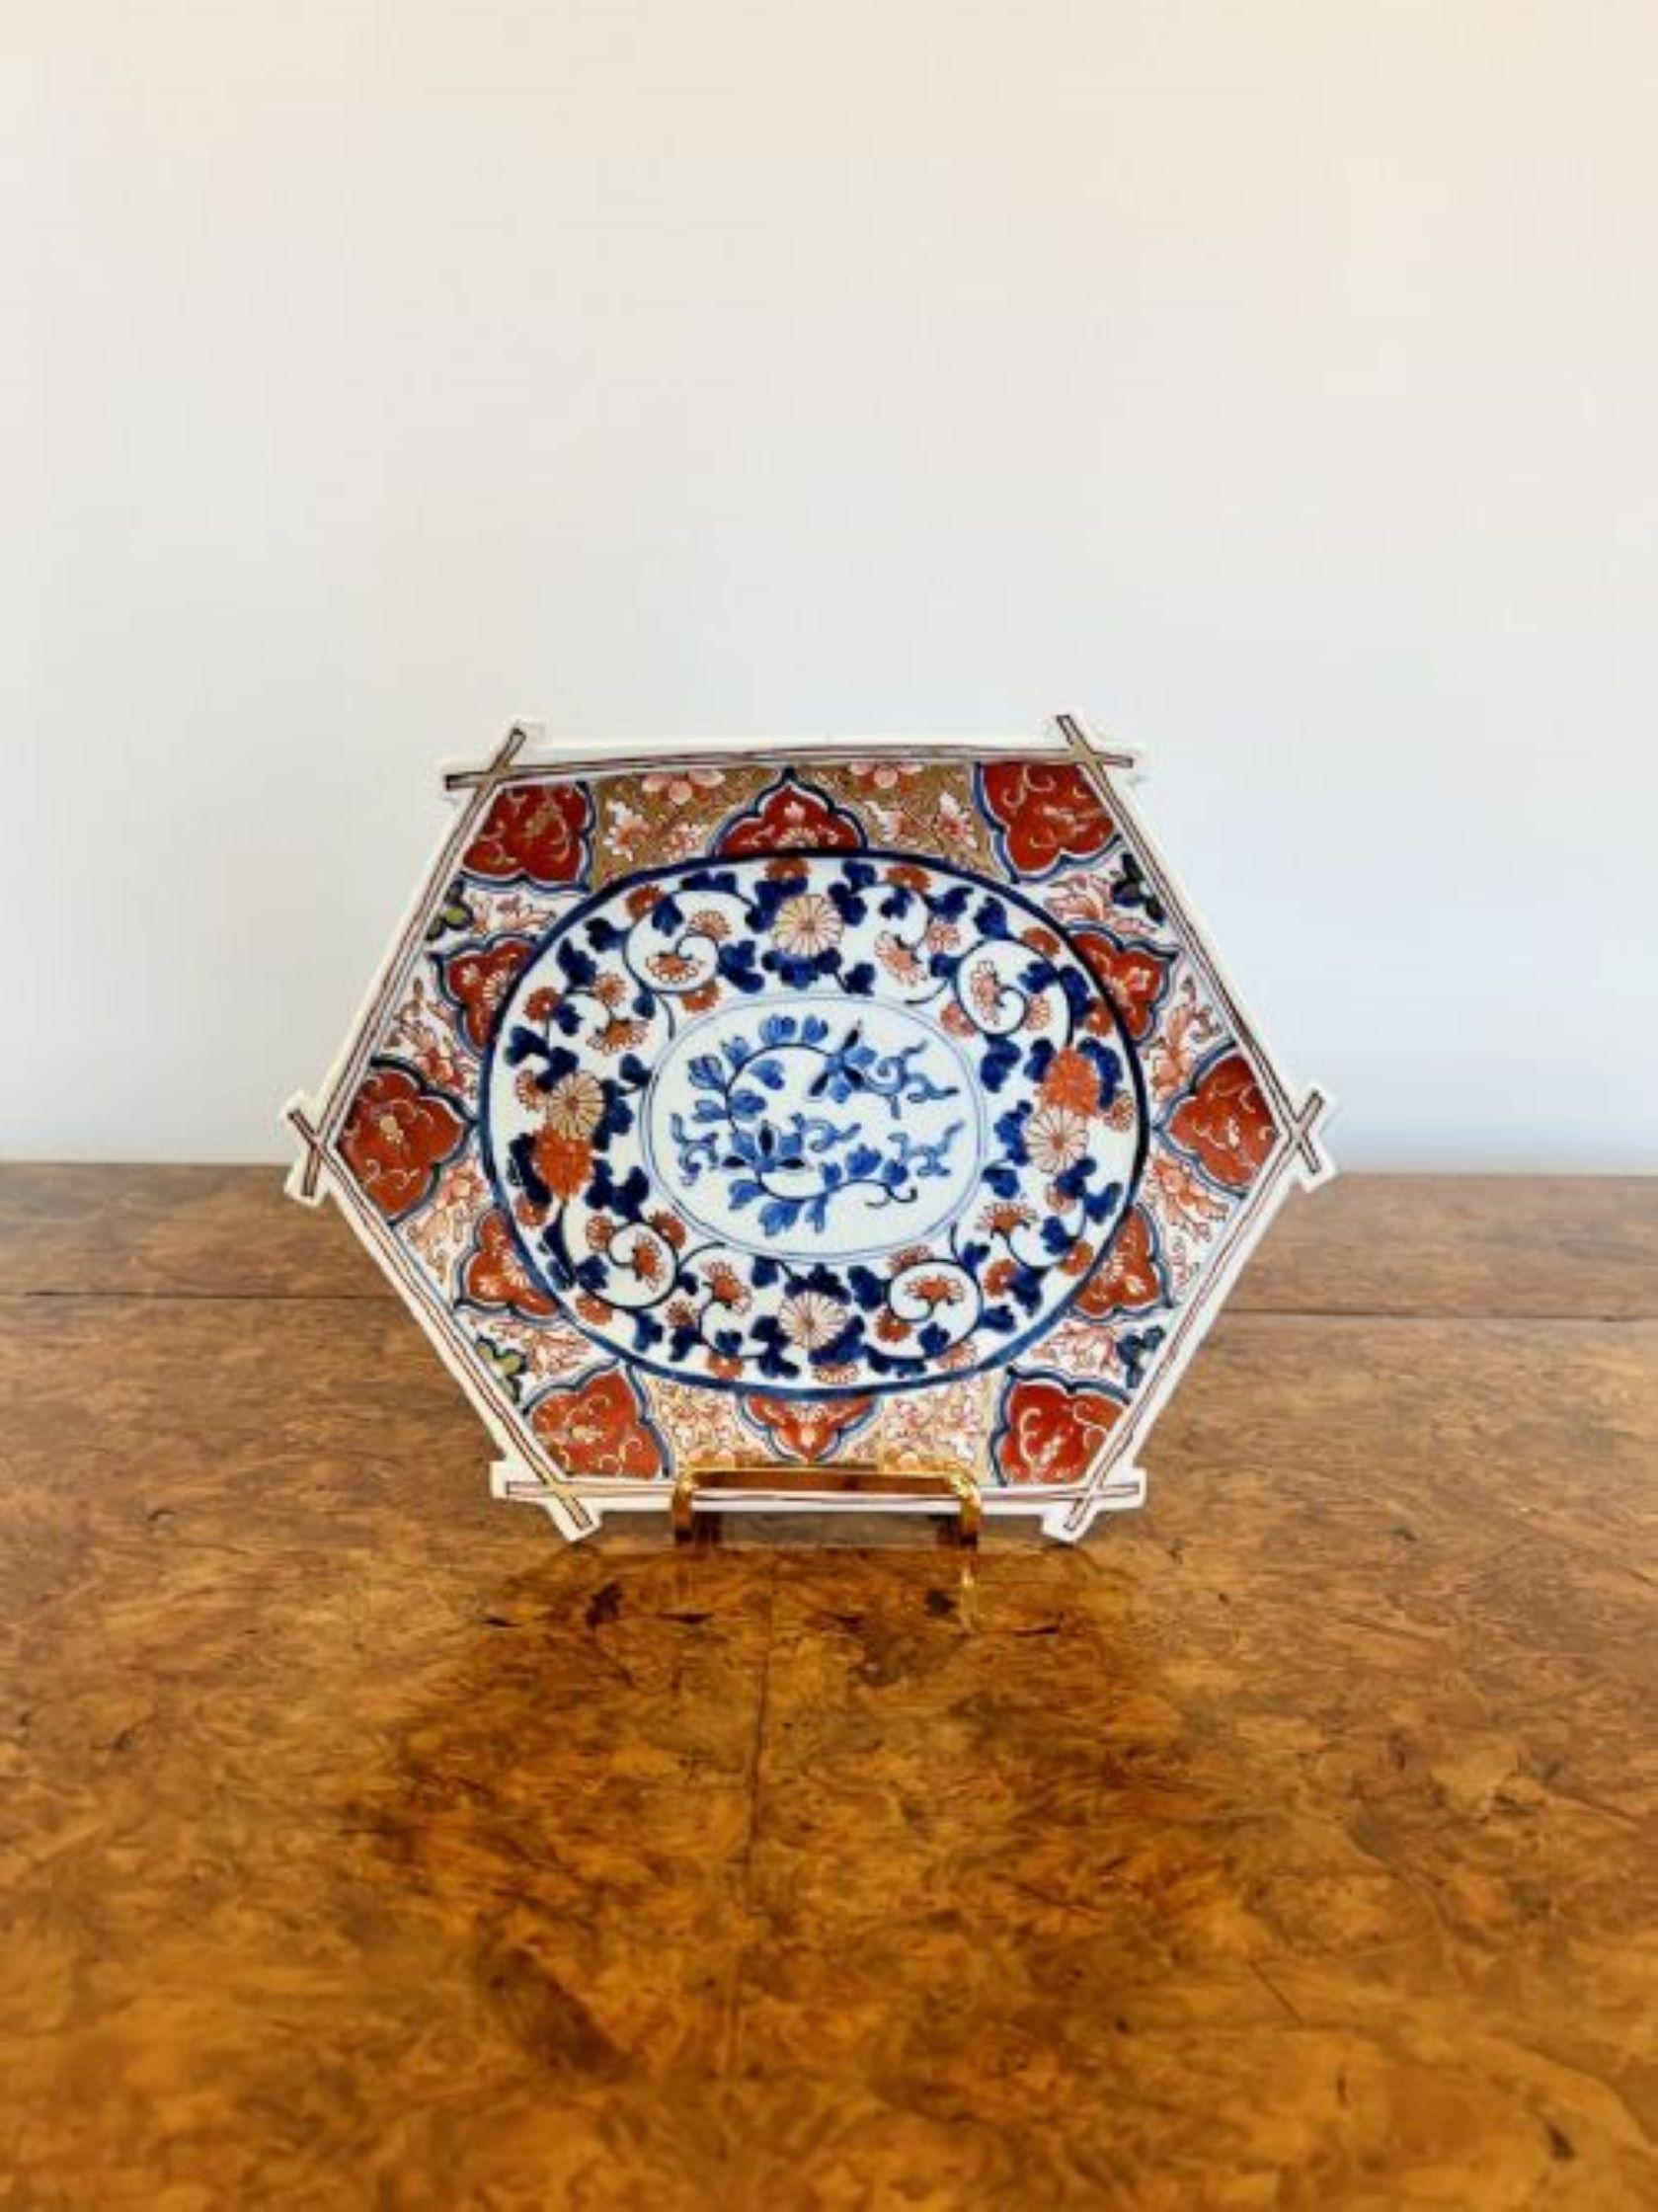 Unusual shaped antique Japanese Imari plate having an unusual shaped antique Imari Japanese plate with a shaped bamboo edge, lovely hand painted decoration with flowers, leaves and scrolls hand painted in wonderful red, blue and white colours. 